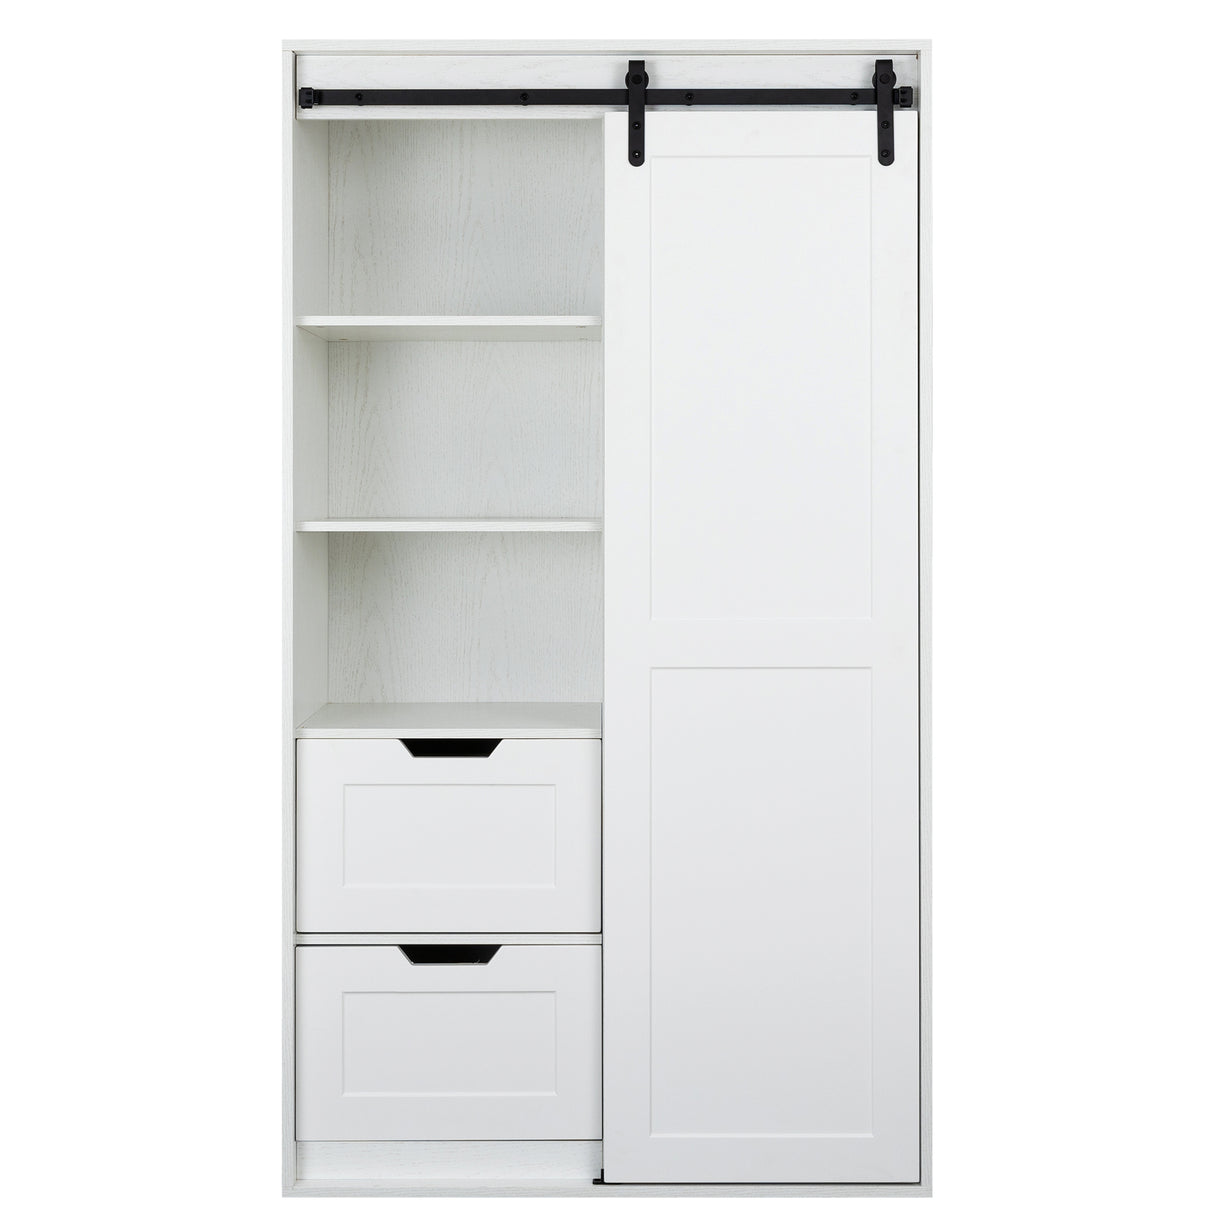 71-inch High wardrobe and cabinet , Clothes Locker，classic sliding barn door armoscope, locker, organizer for bedroom, cloakroom, living room,color： white Home Elegance USA